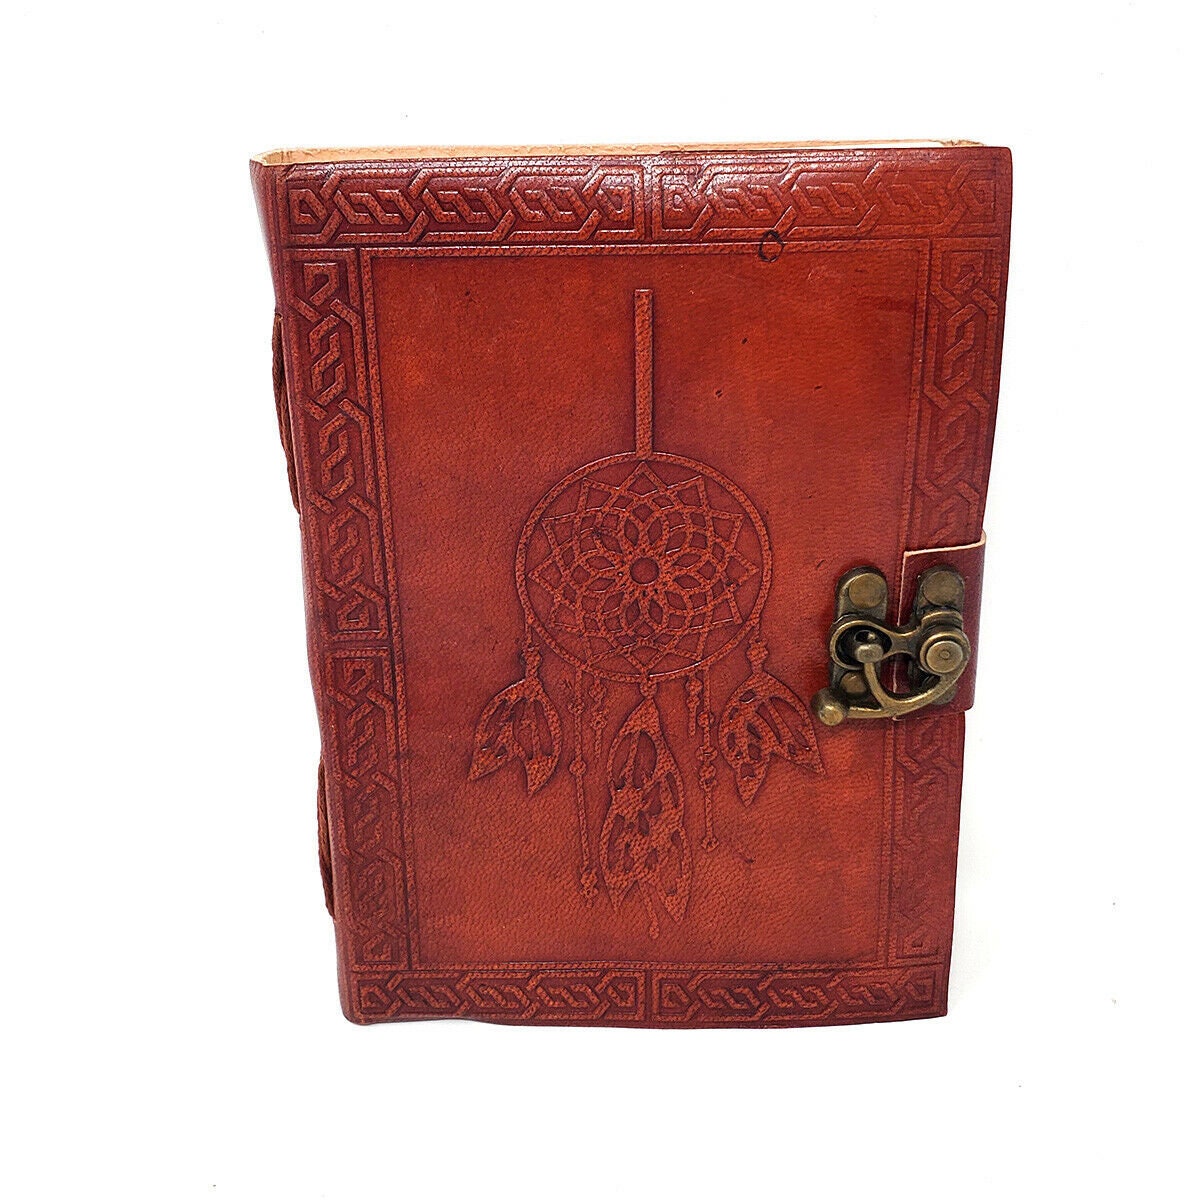 8.5 X 11 Notebook / Refillable Journal / Large Leather Journal / 8.5 X 11  Sketchbook / Hand Stitched Leather Journal 